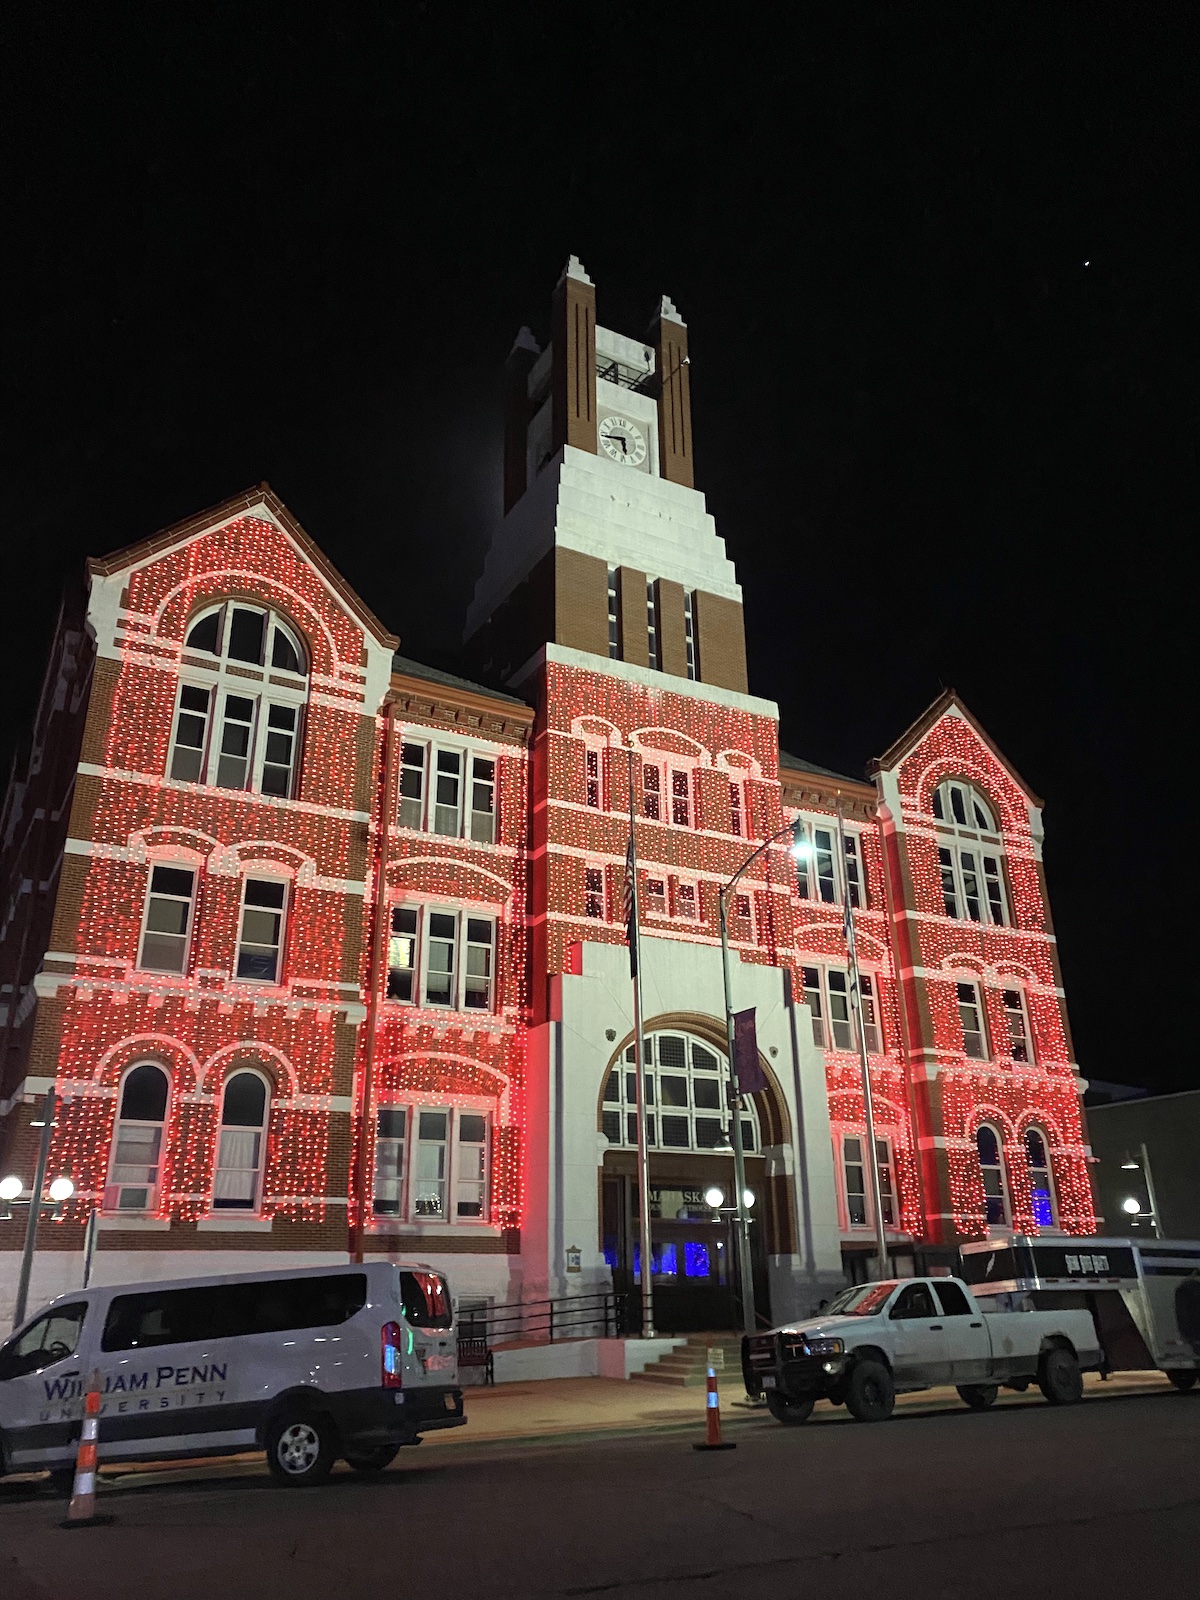 Lighted buildings around City Square Park in Oskaloosa, Iowa